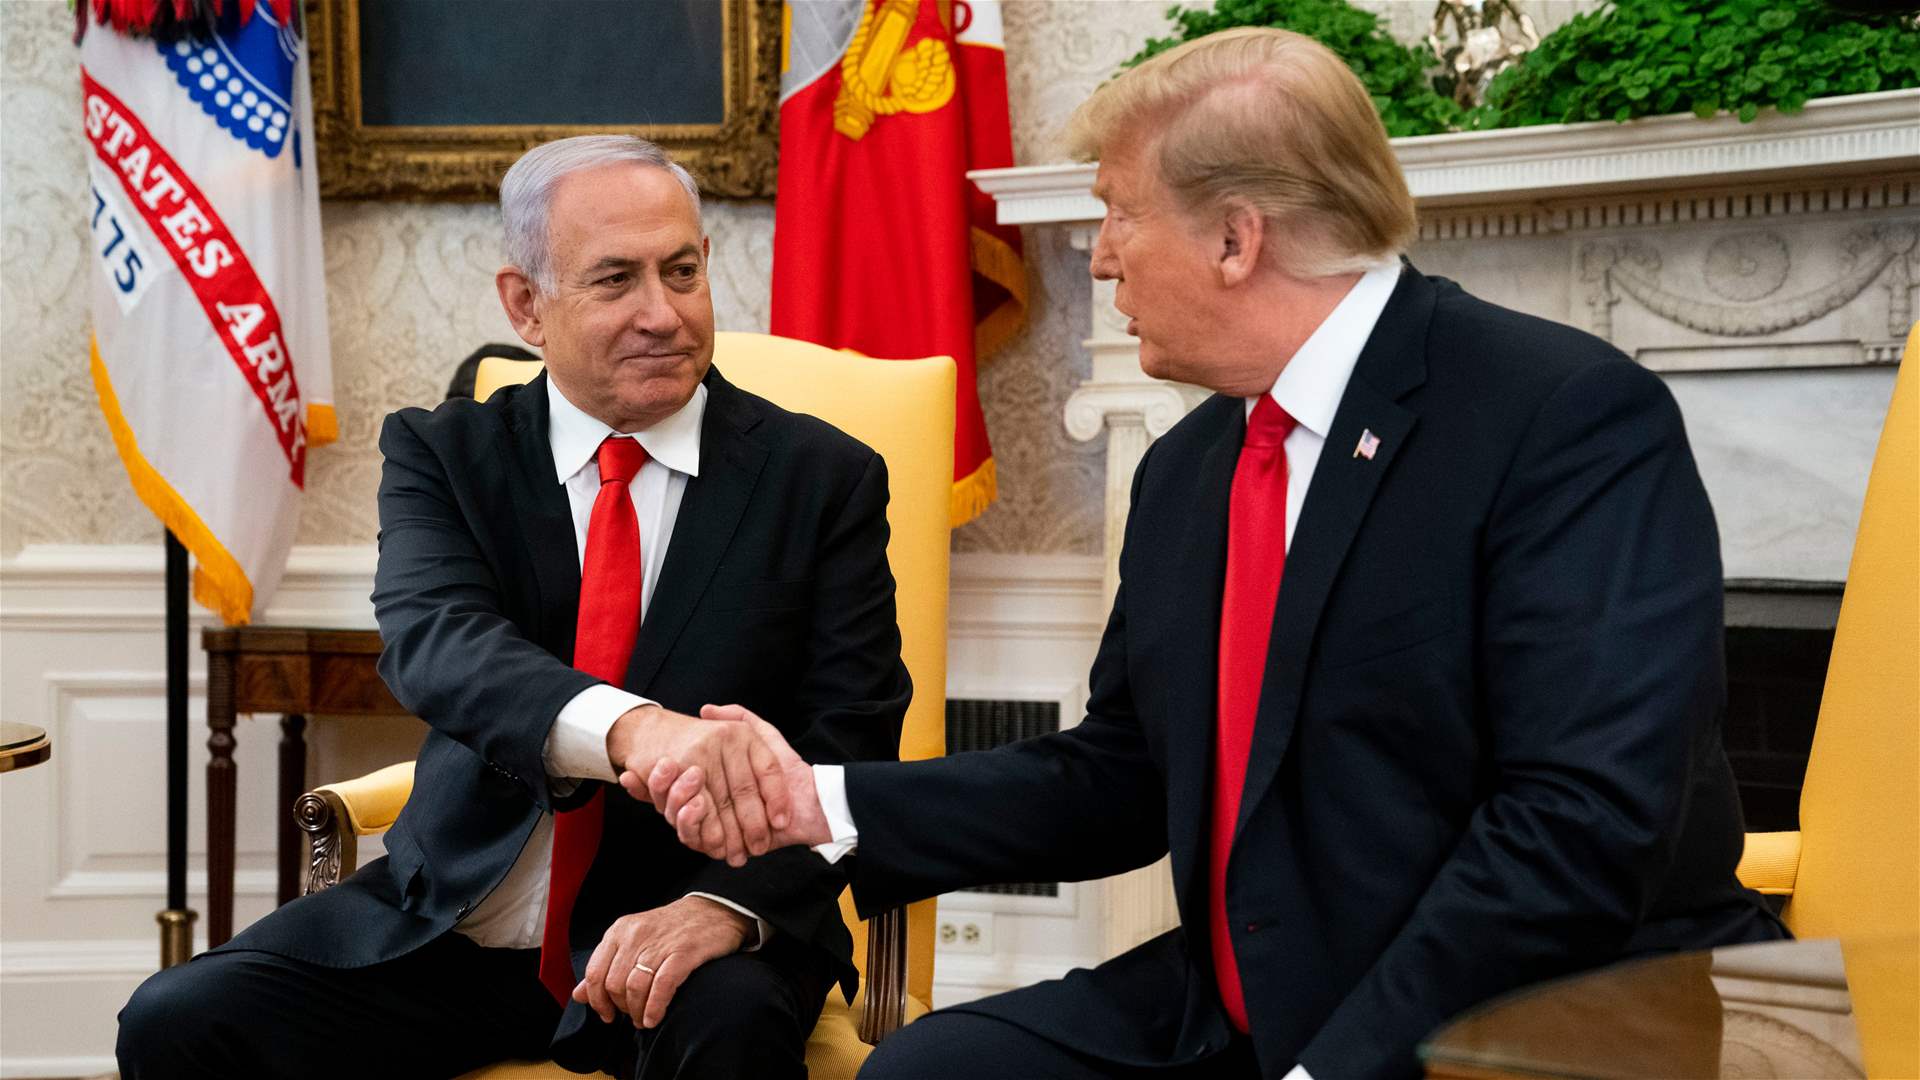 Netanyahu to hold talks with Trump aimed at easing tensions